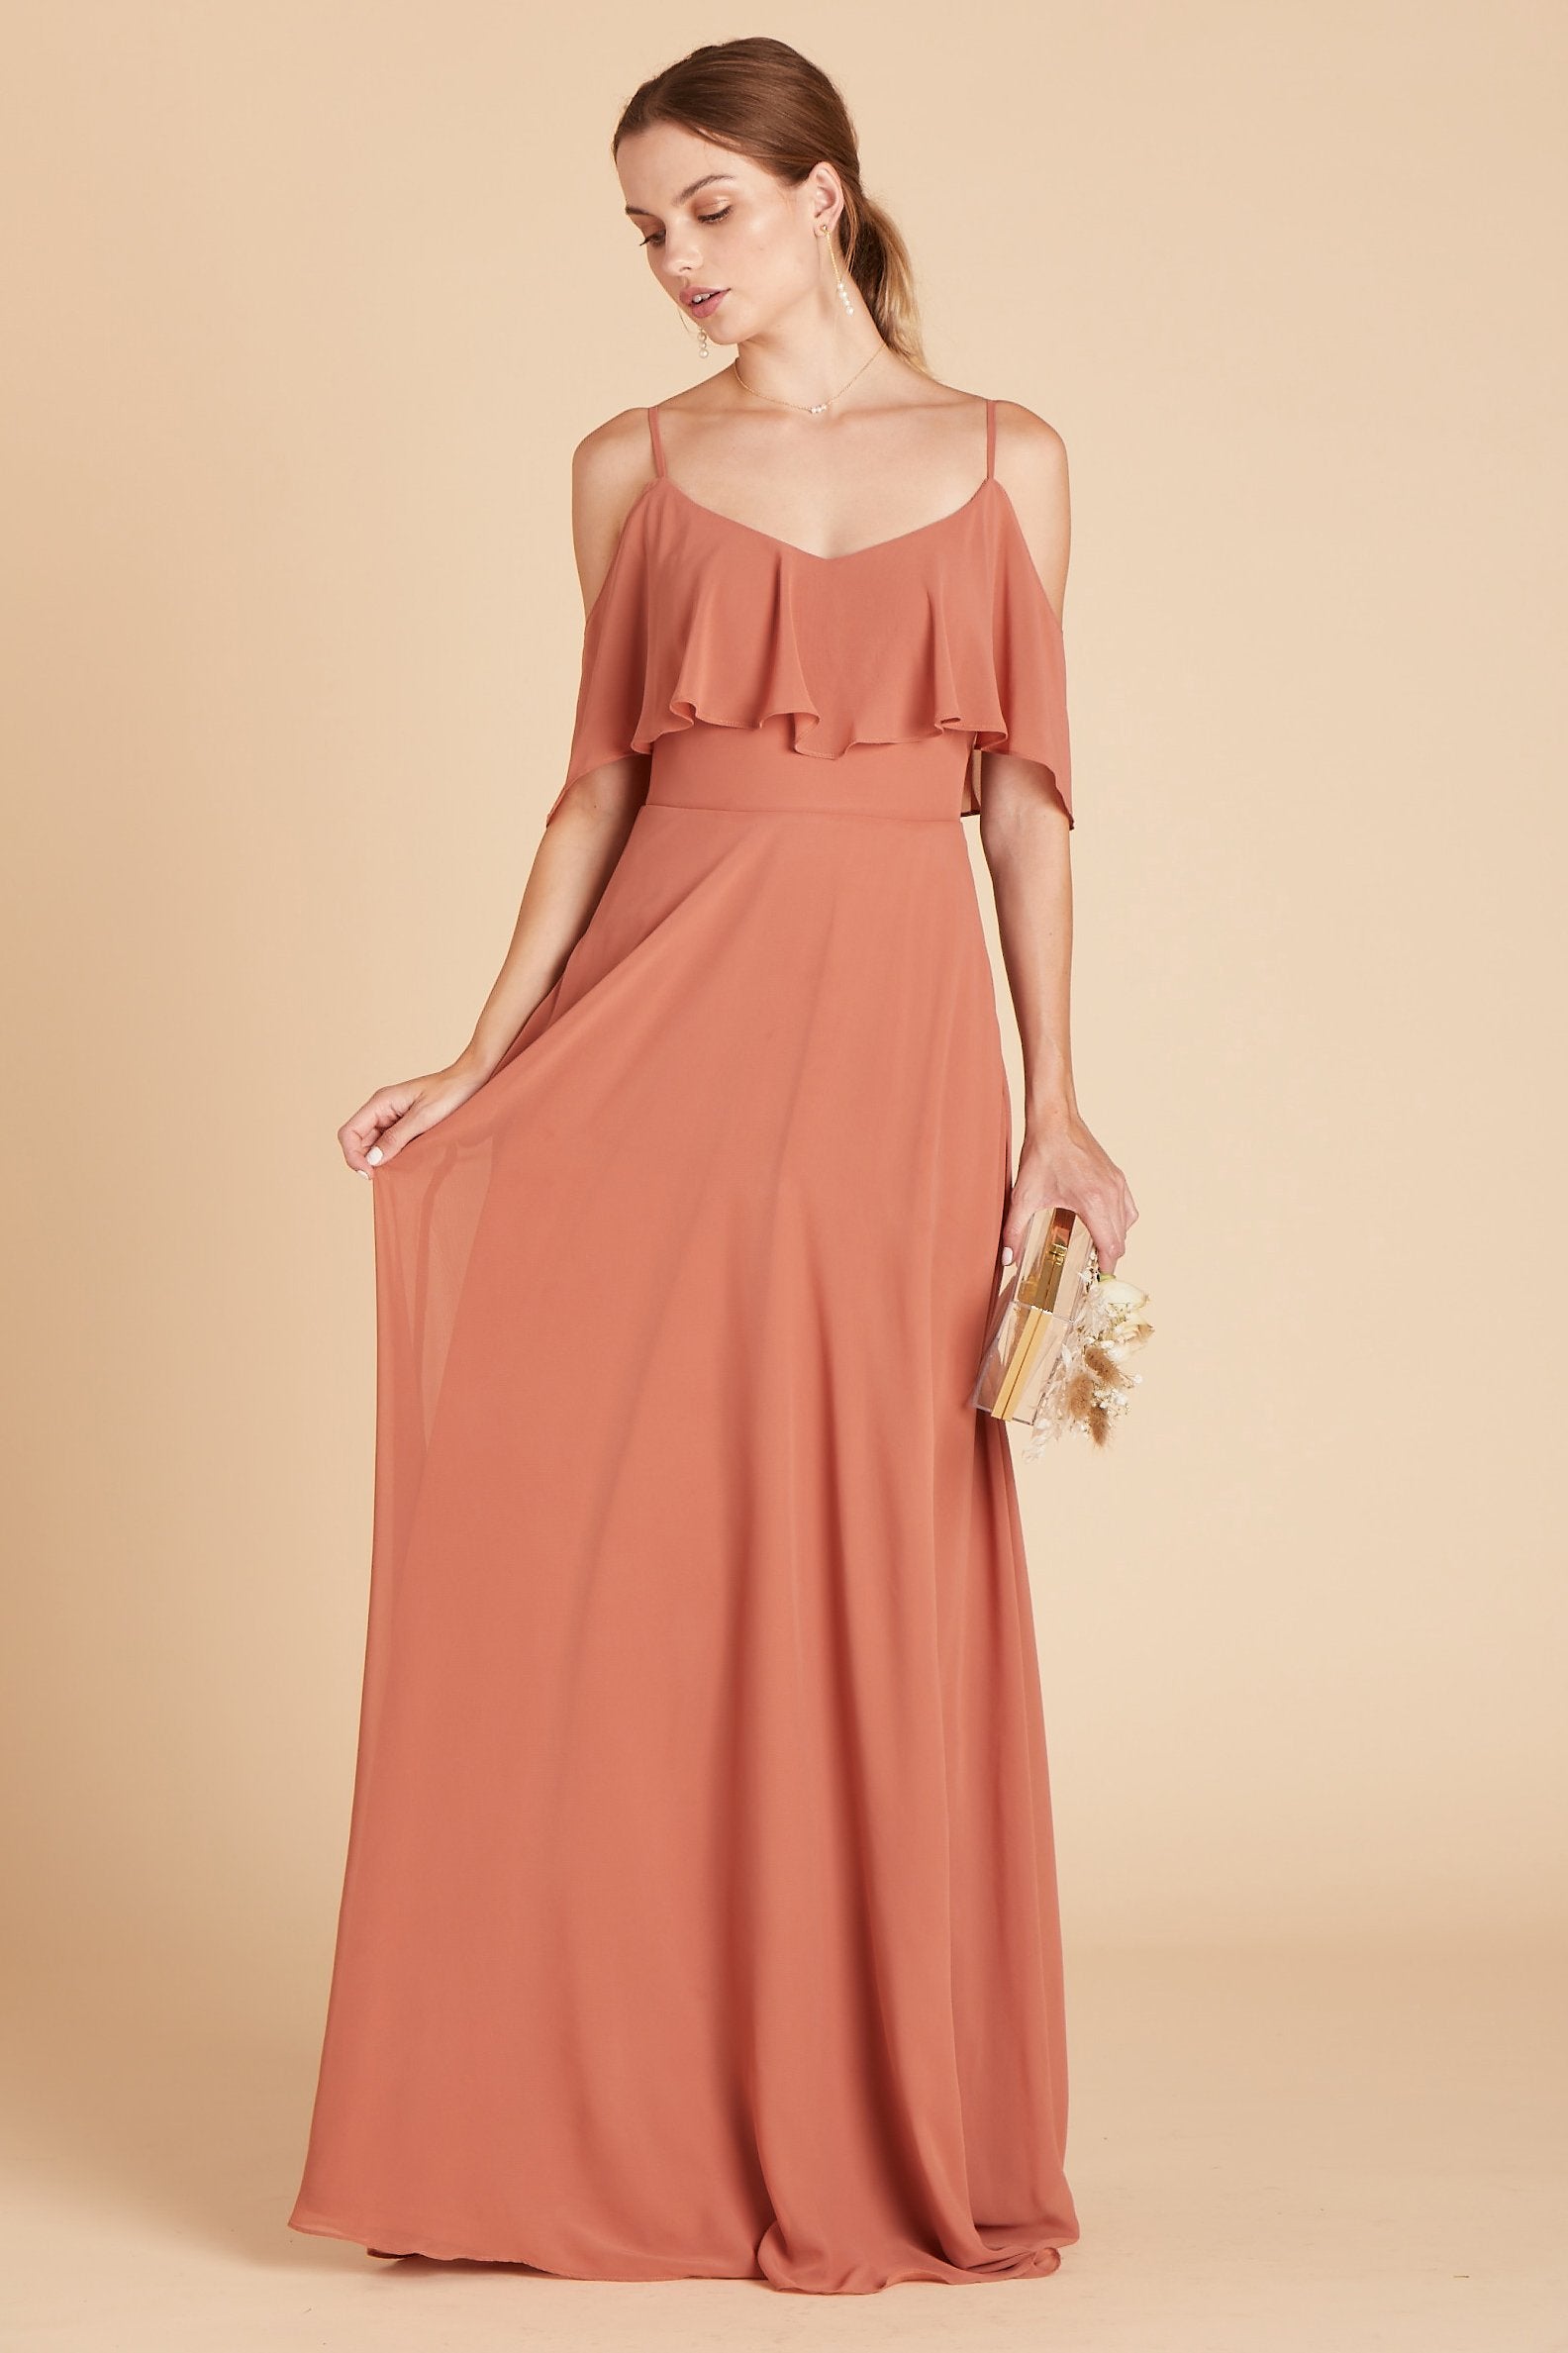 Jane convertible bridesmaid dress in terracotta orange chiffon by Birdy Grey, front view